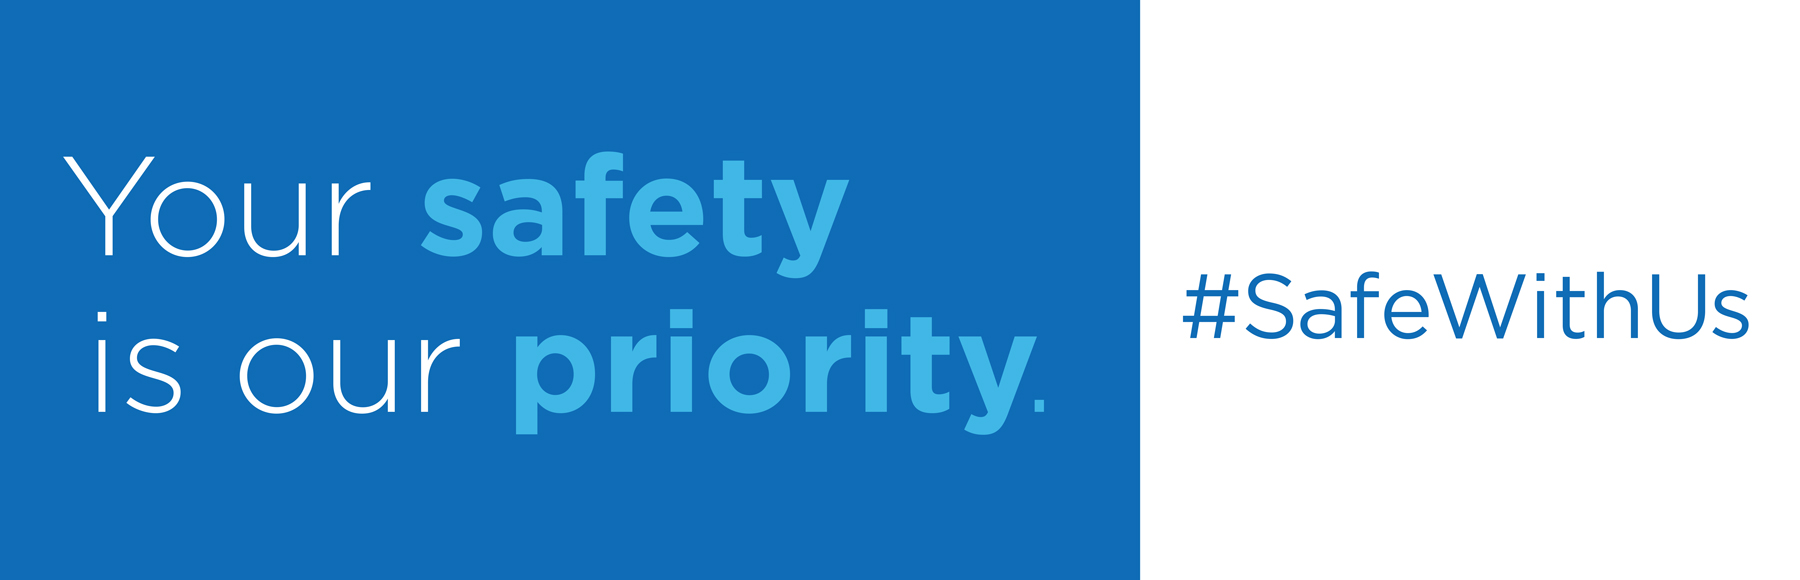 Your safety is our priority. #SafeWithUs